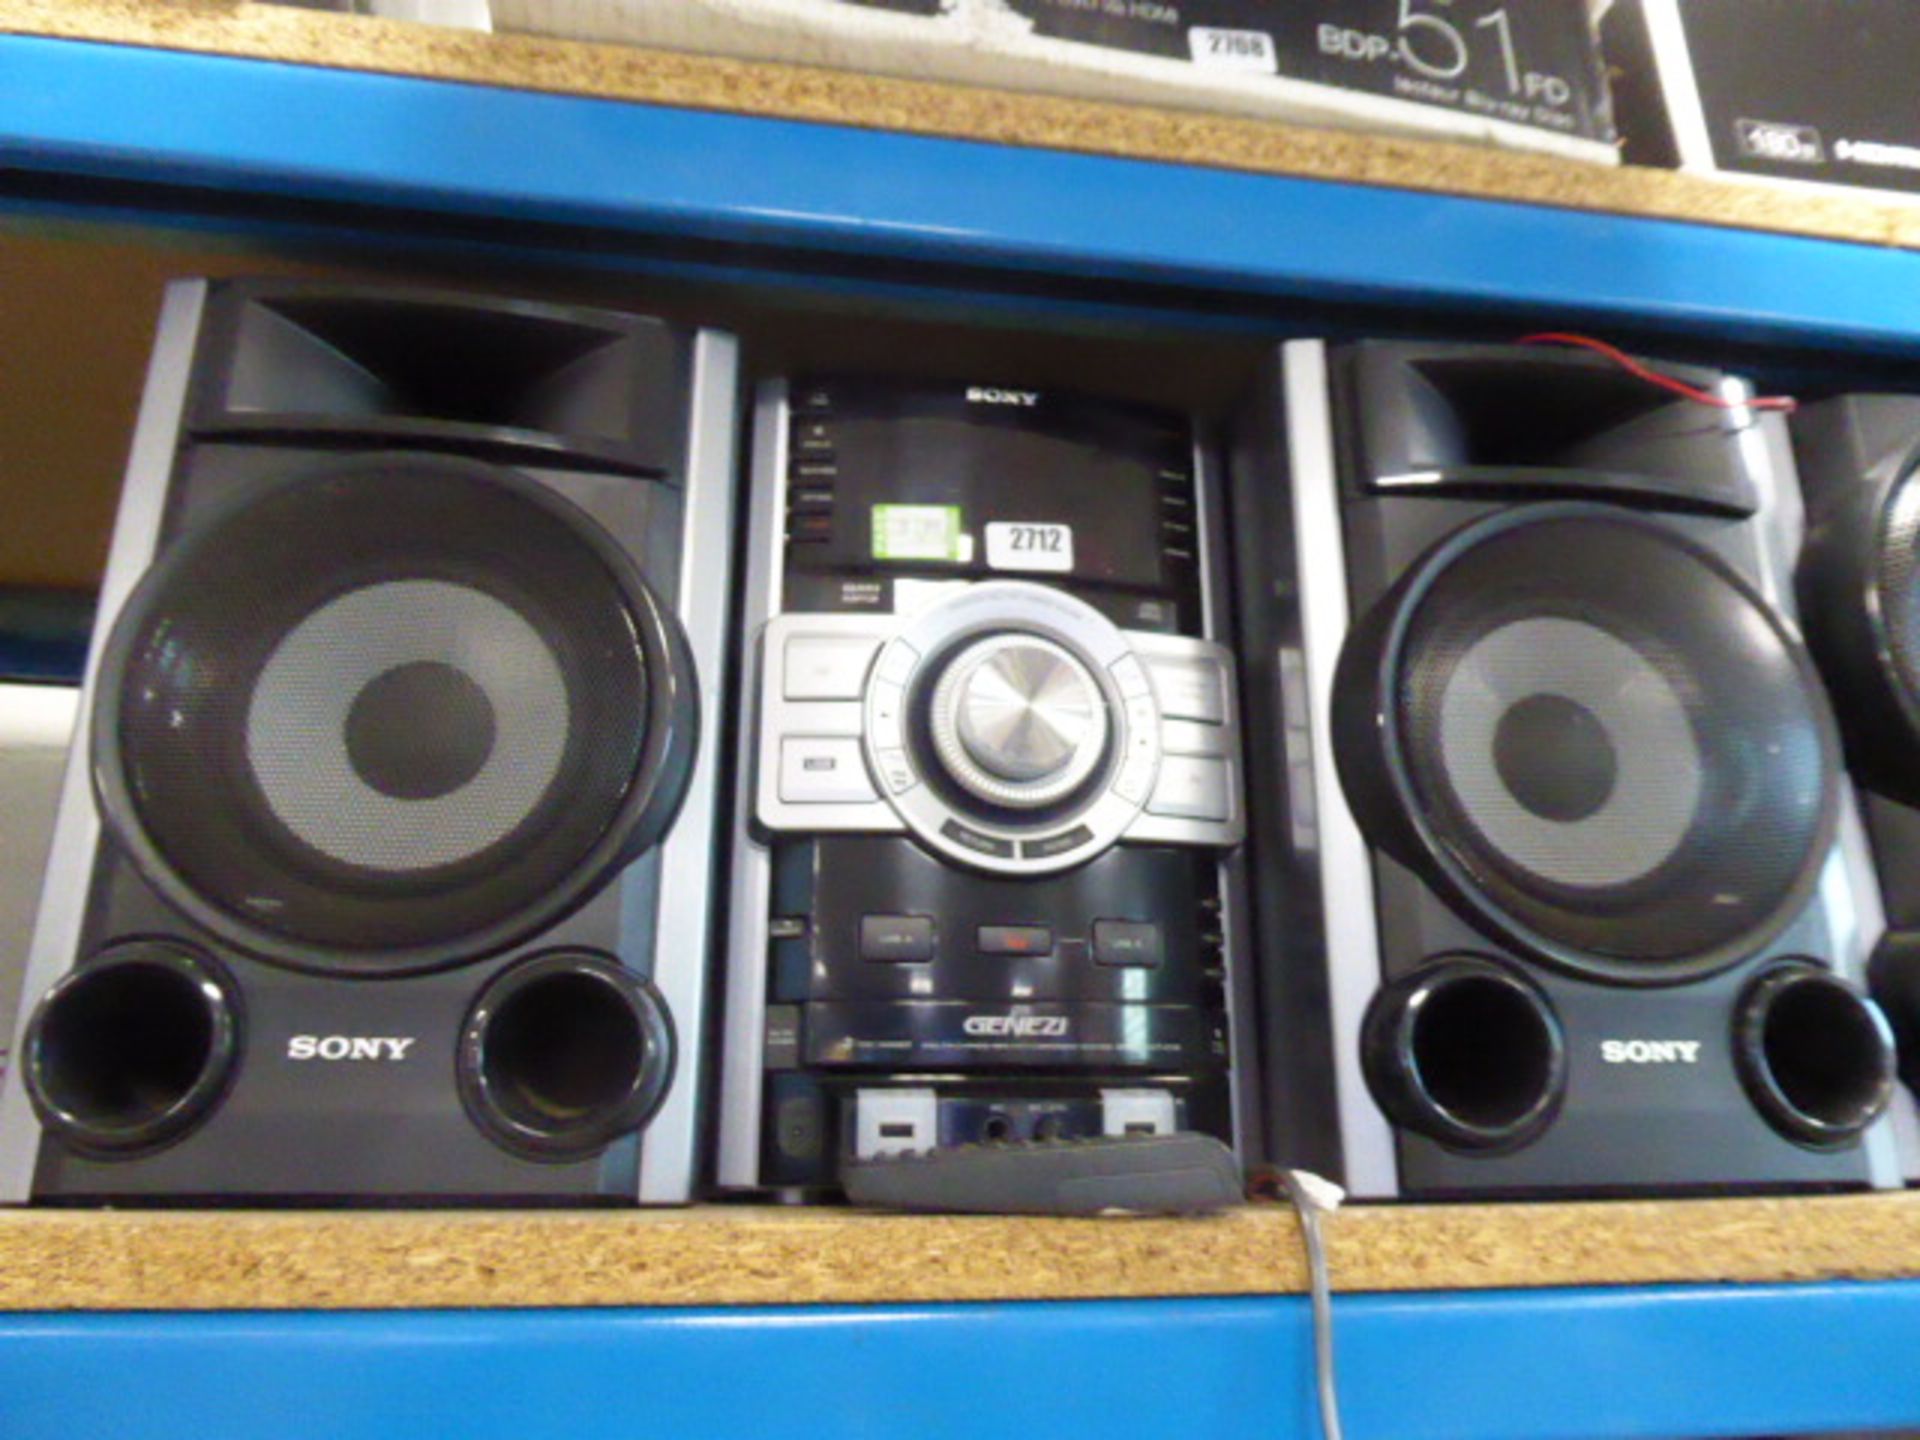 Sony hi-fi unit 400w speakers and remote